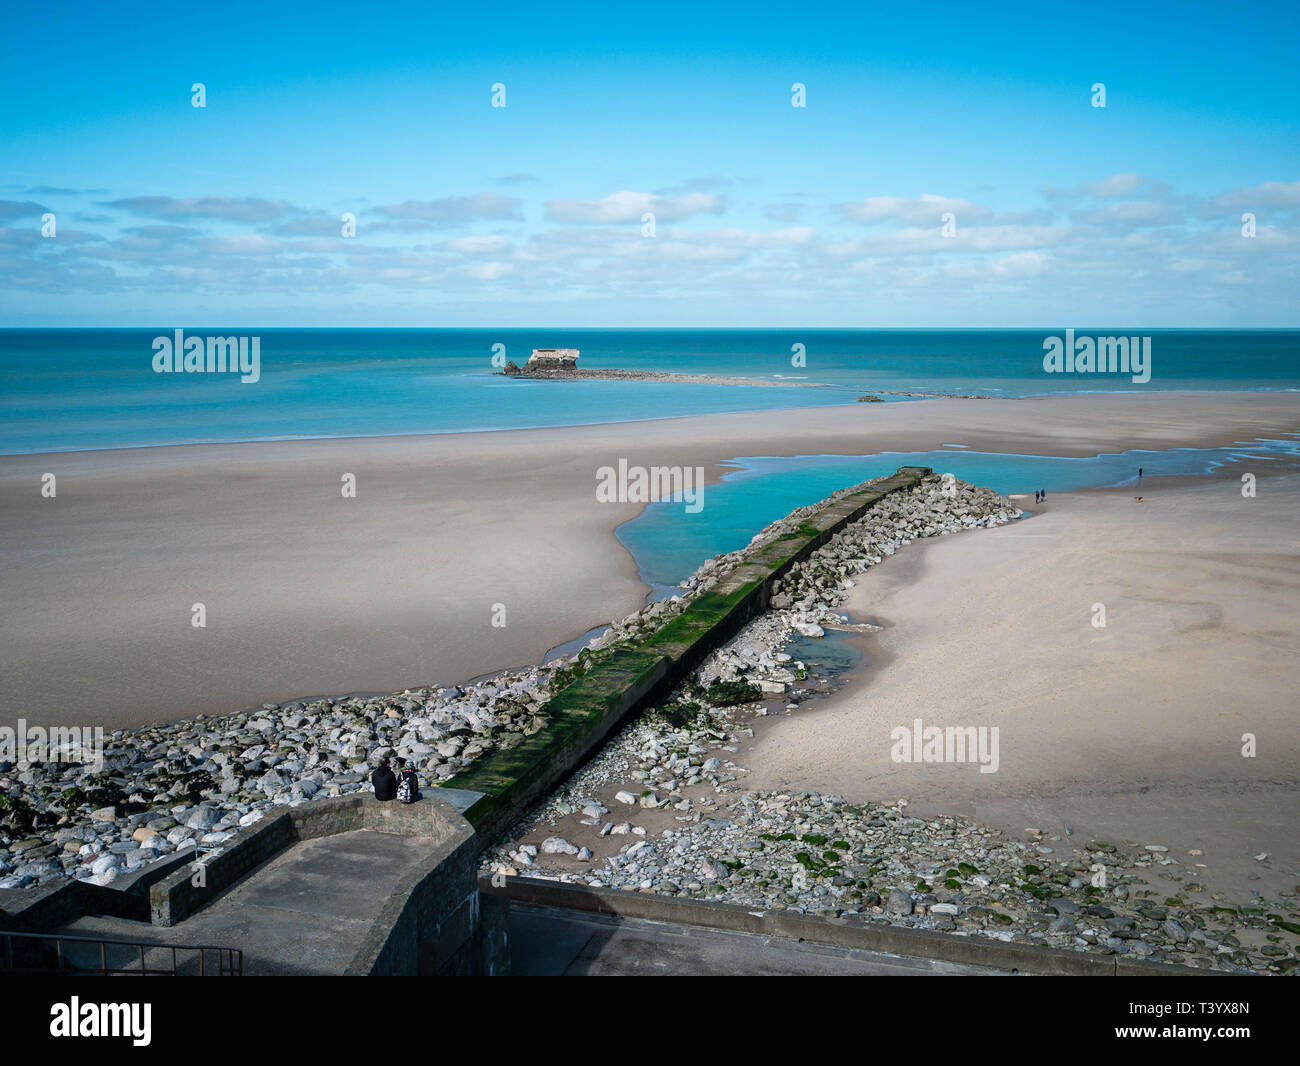 Elevated view of the ancient Fort de l'Heurt surrounded by water on a sandy beach with a mole in the foreground Stock Photo